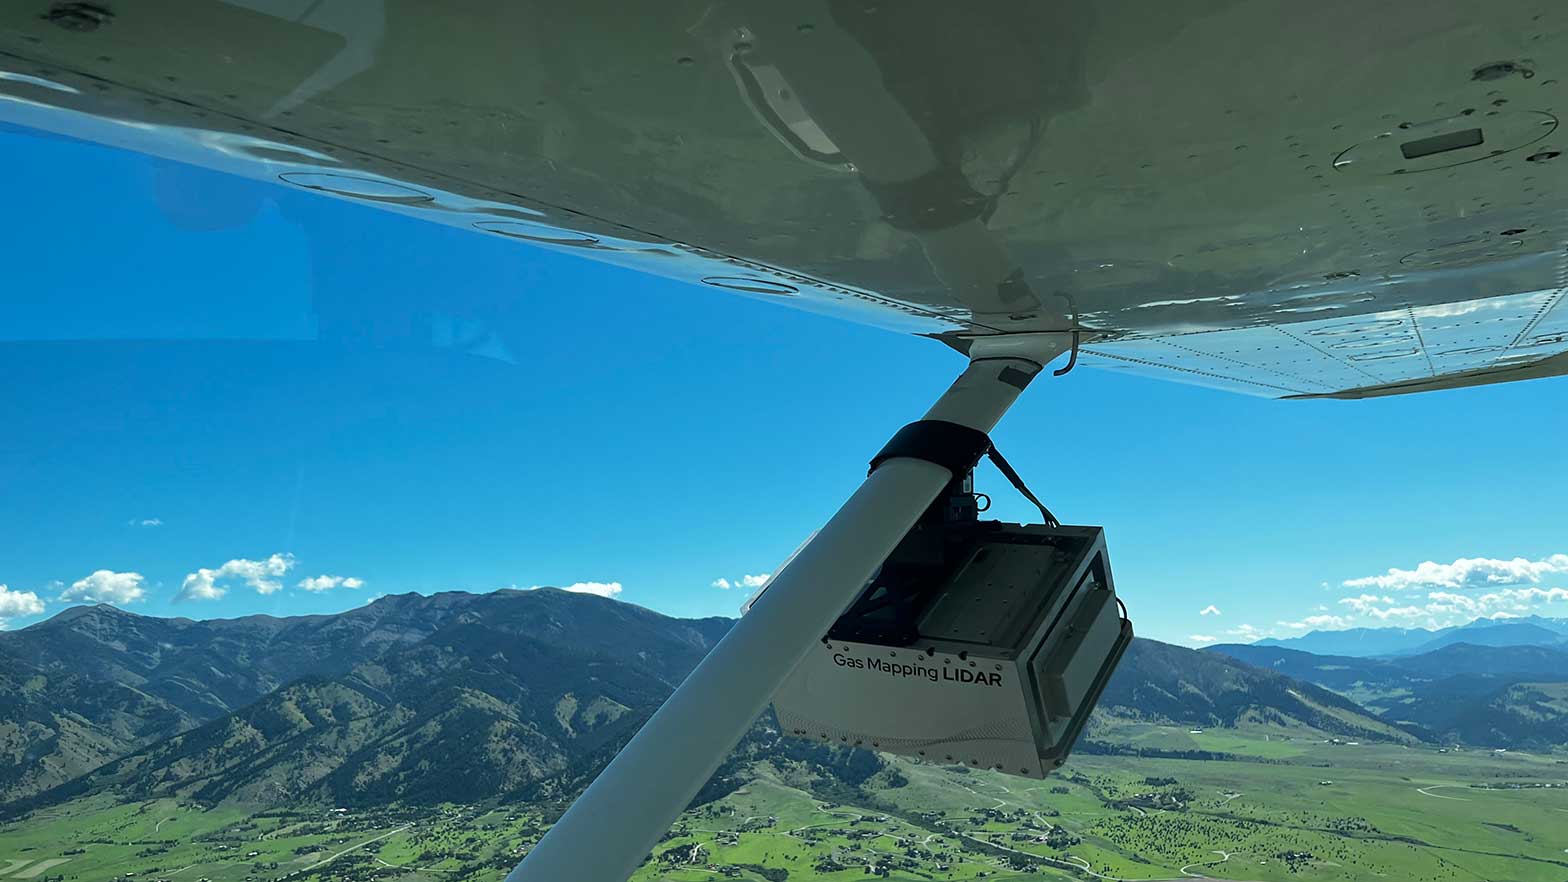 Aircraft-based solutions like Bridger Photonics (pictured) help us and nearby operators cost-effectively screen assets for methane emissions across a wide geographic footprint.